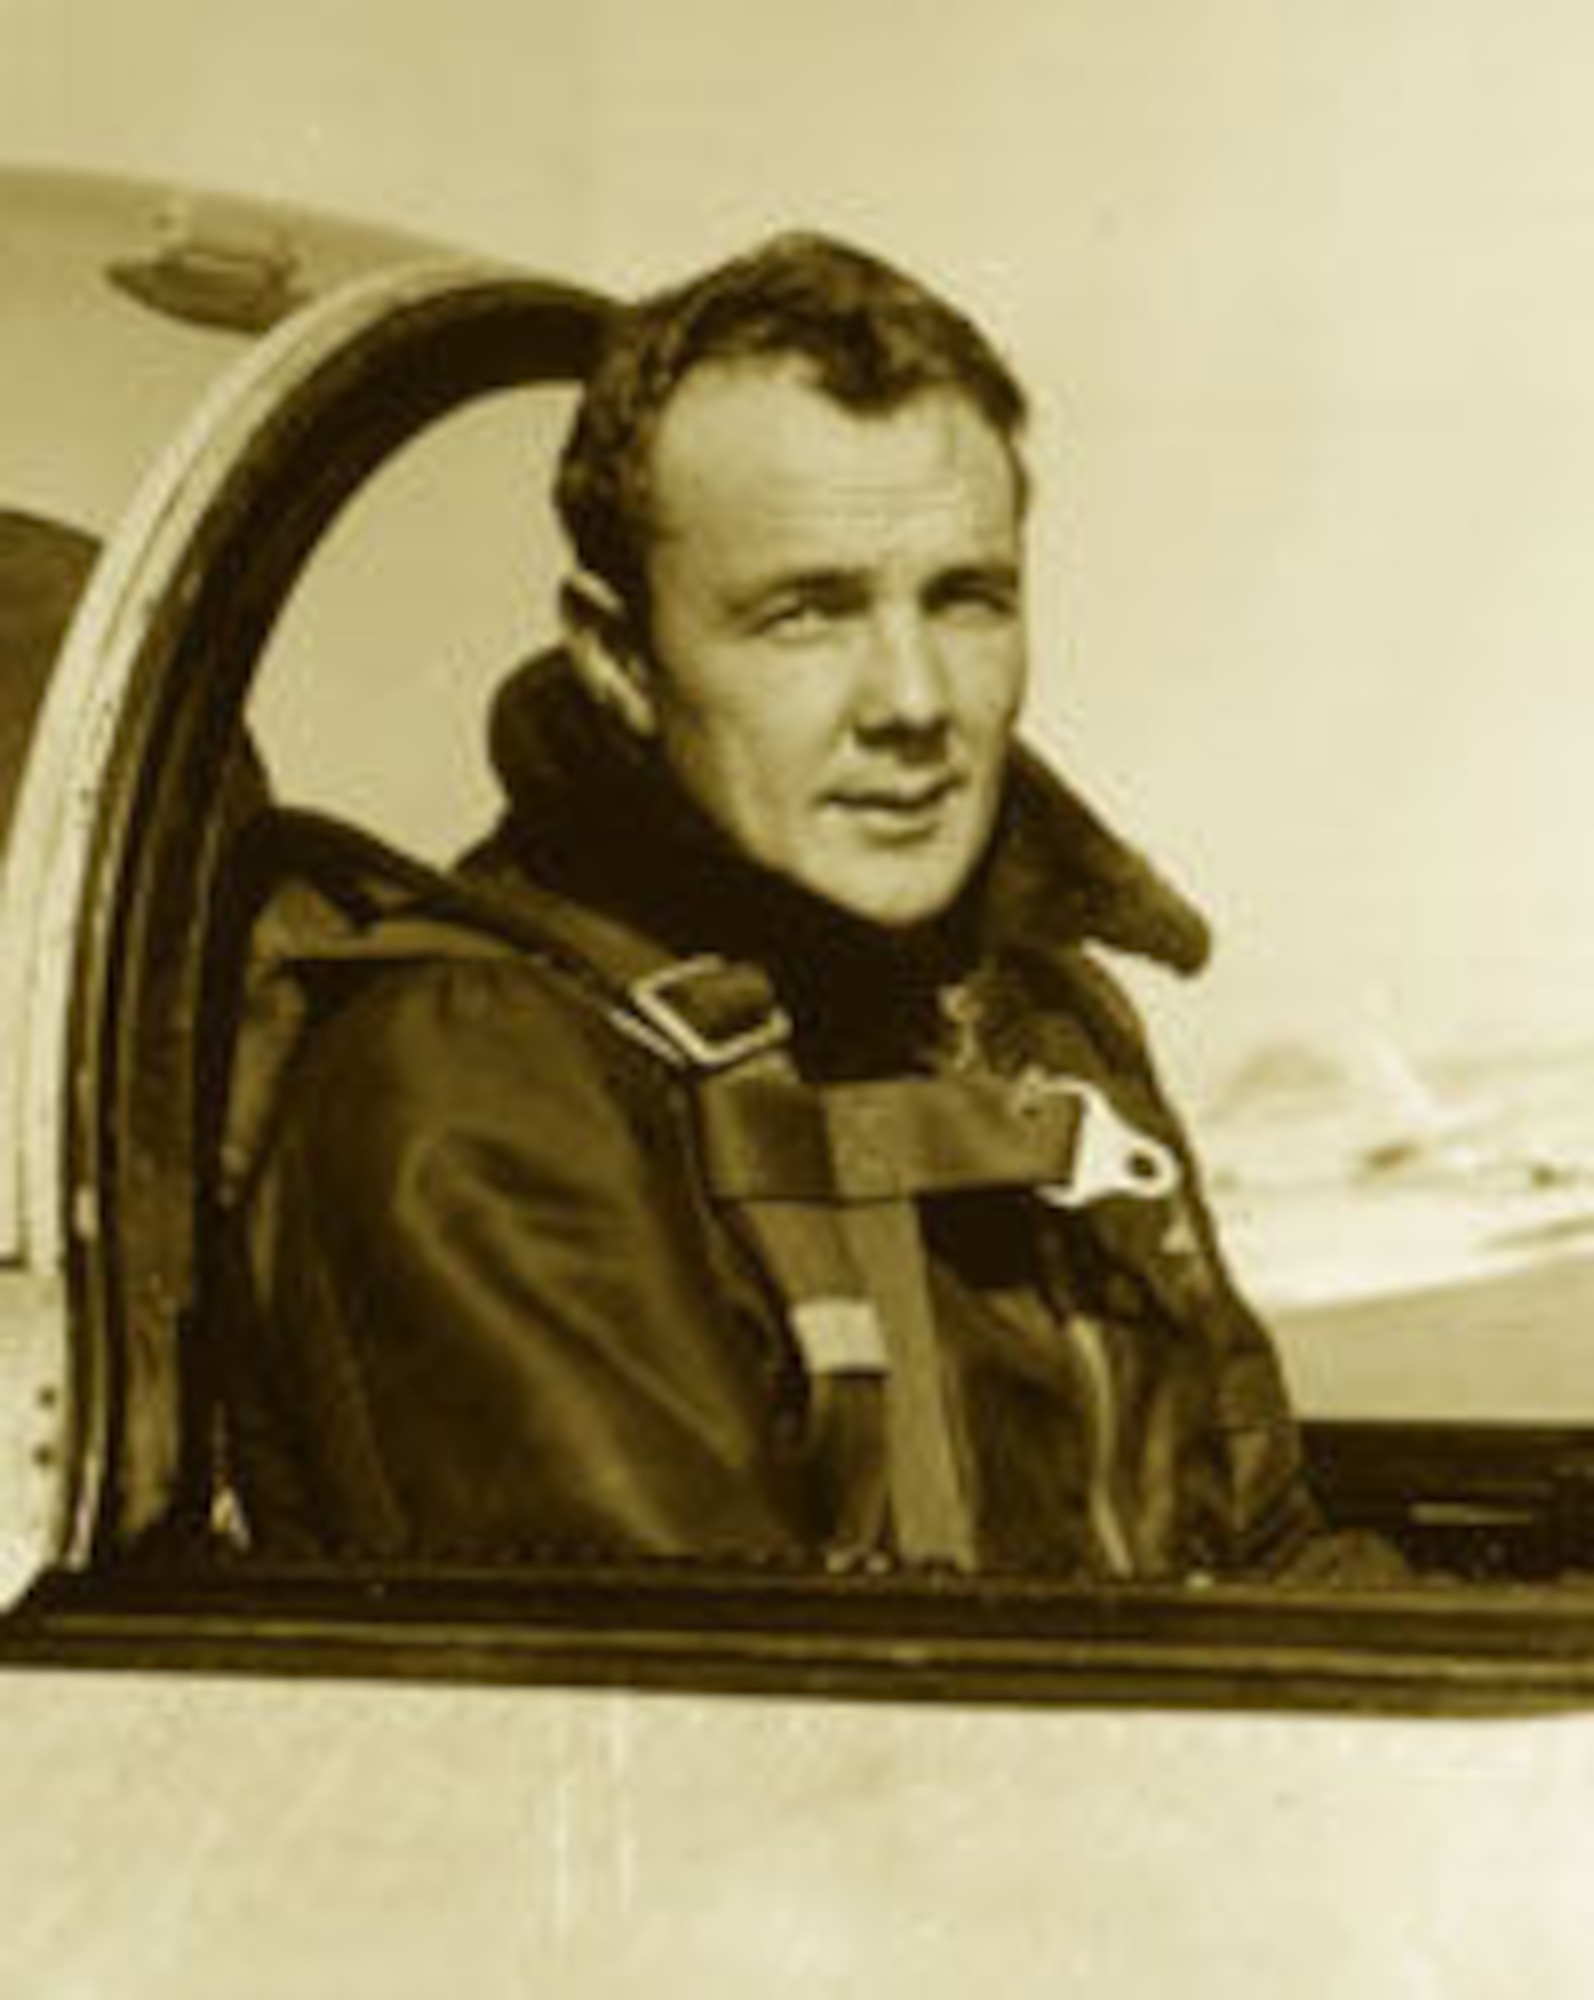 Maj. Donald Adams became the sixth ace of the wing on May 3, 1952.  After reassignment back to the U.S., he was killed in F-89 crash during a Detroit air show Aug. 30, 1952. Major Adams was assigned to the 16th Fighter-Interceptor Squadron. (Courtesy photo)